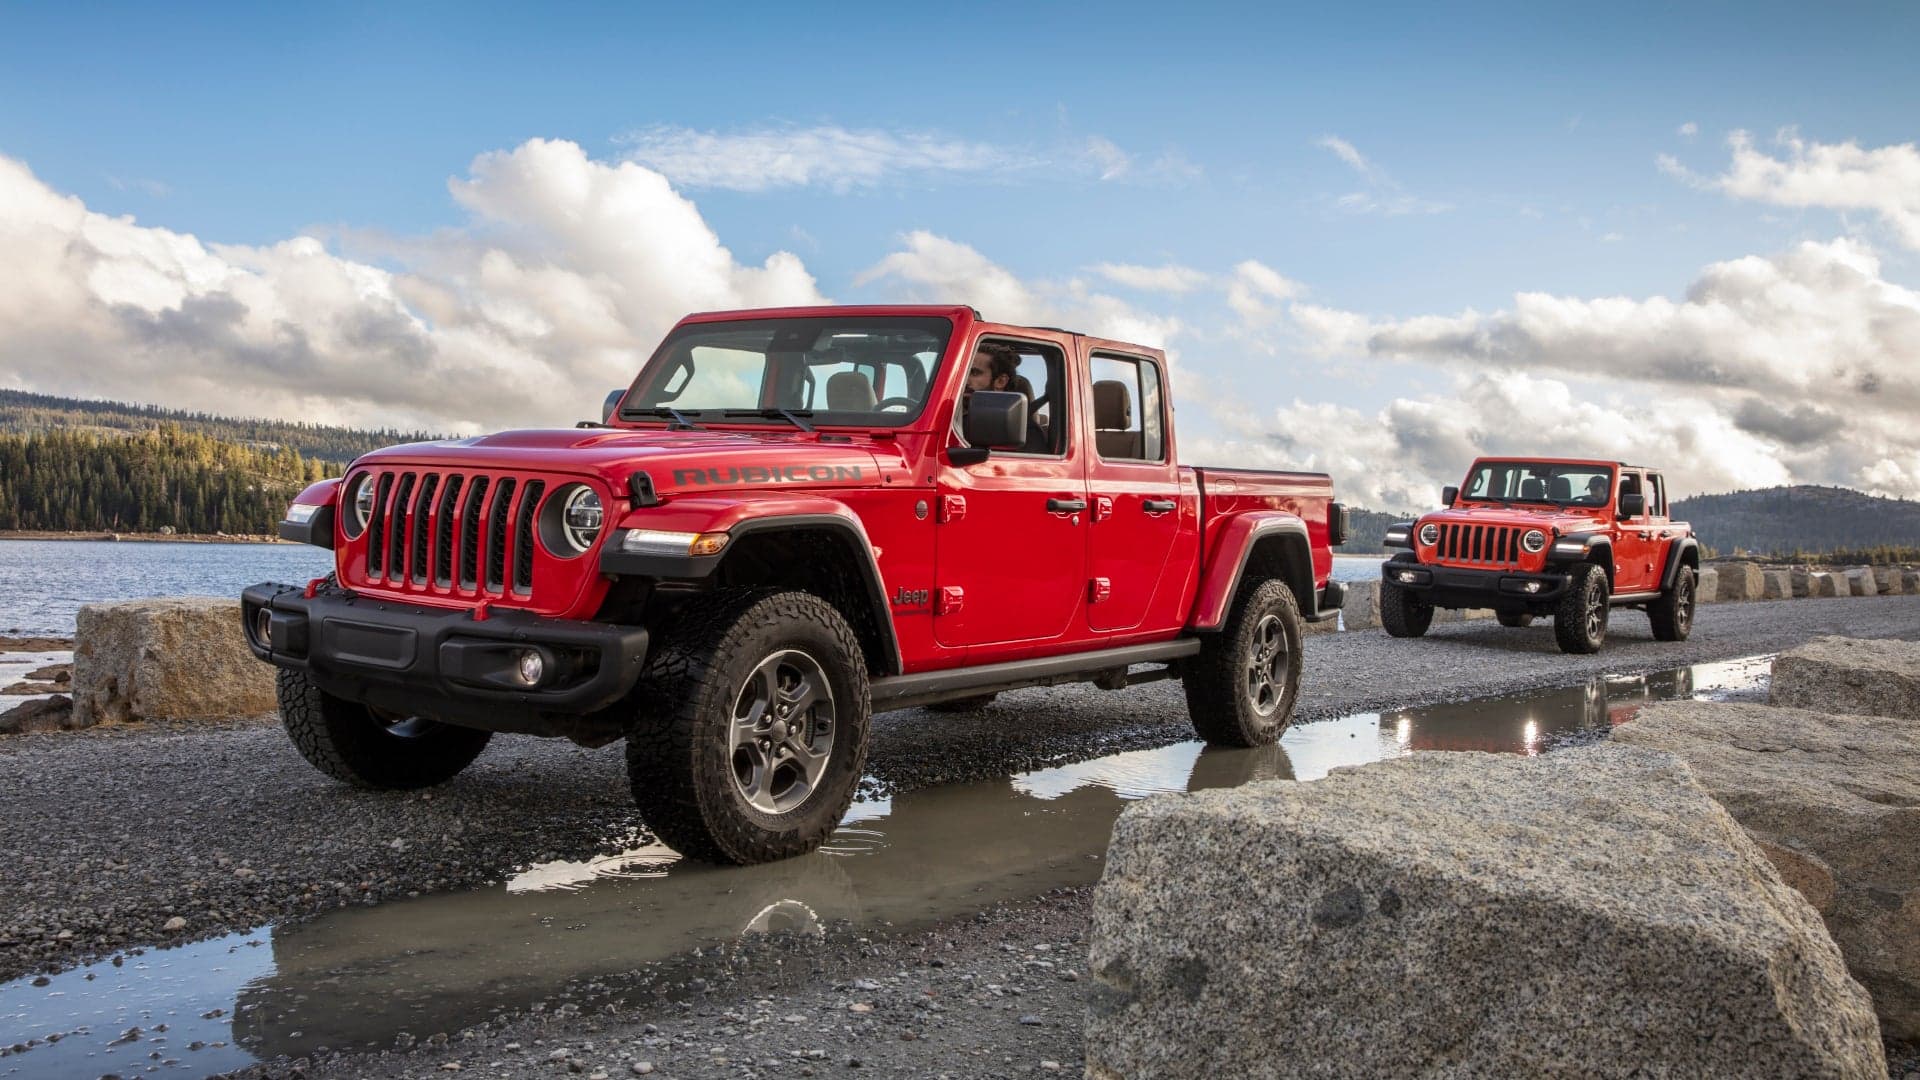 Jeep Now Offers Gorilla Glass Windshields for Wrangler and Gladiator